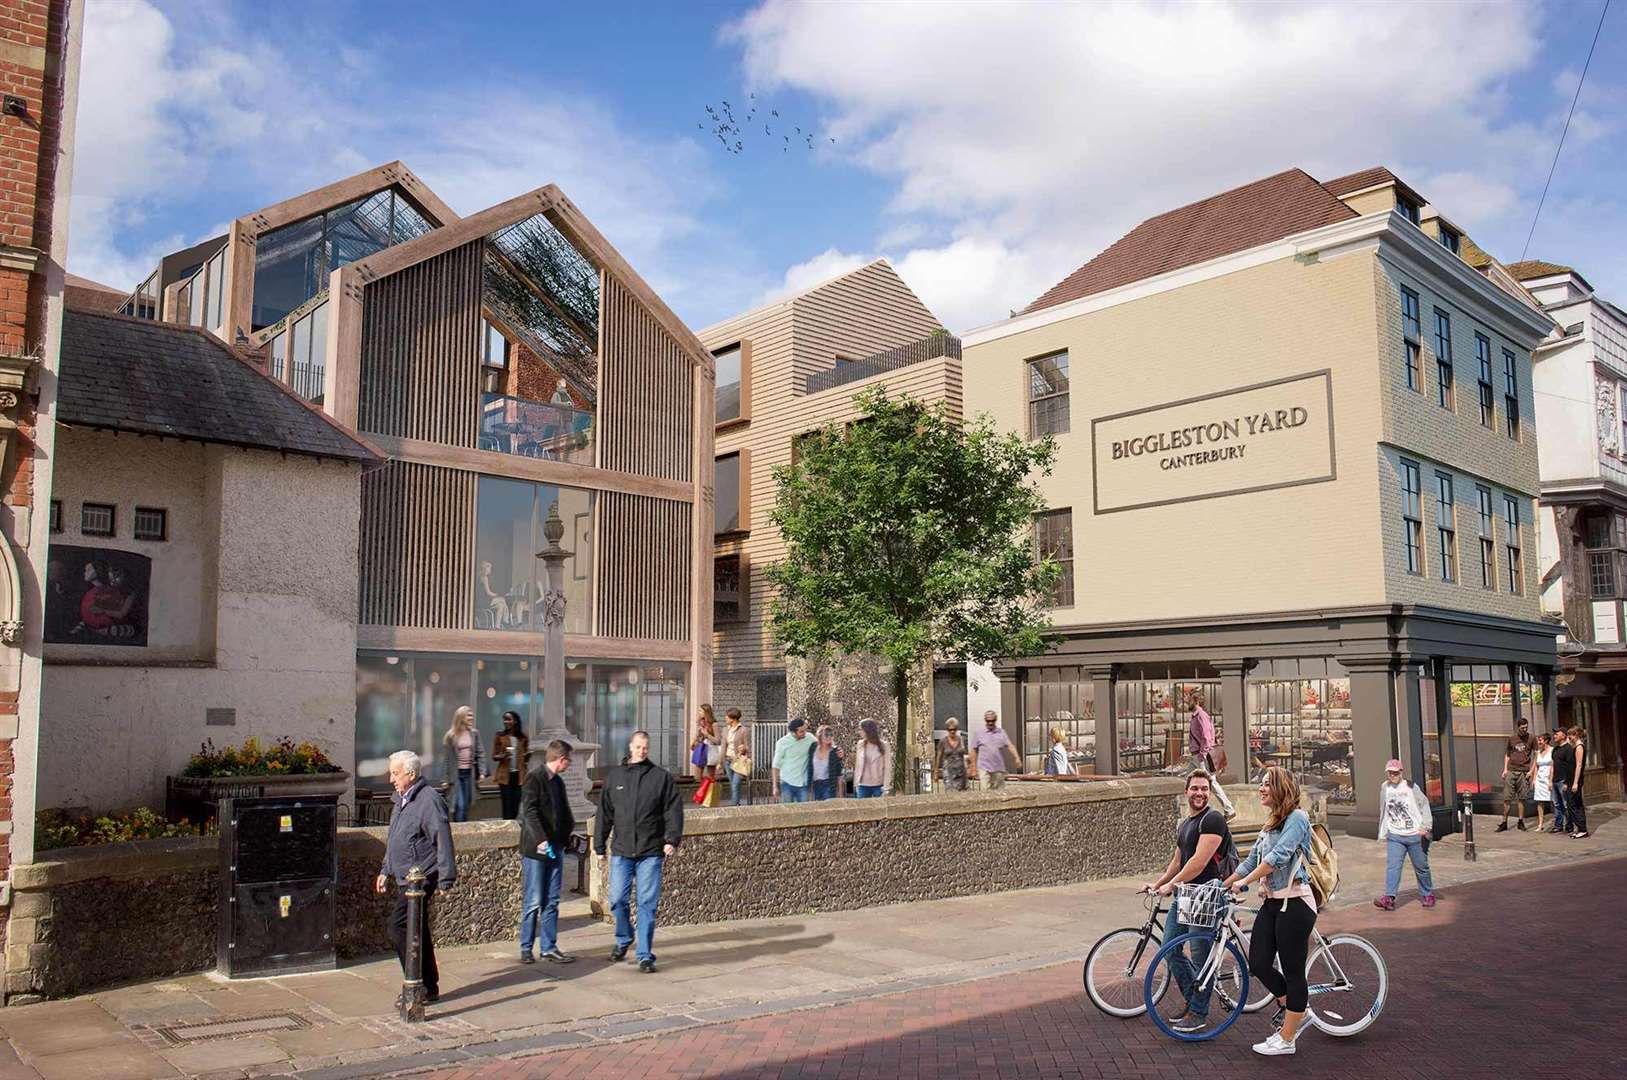 Developers say the Biggleston Yard development will change the face of Canterbury's high street. Pic: The Setha Group